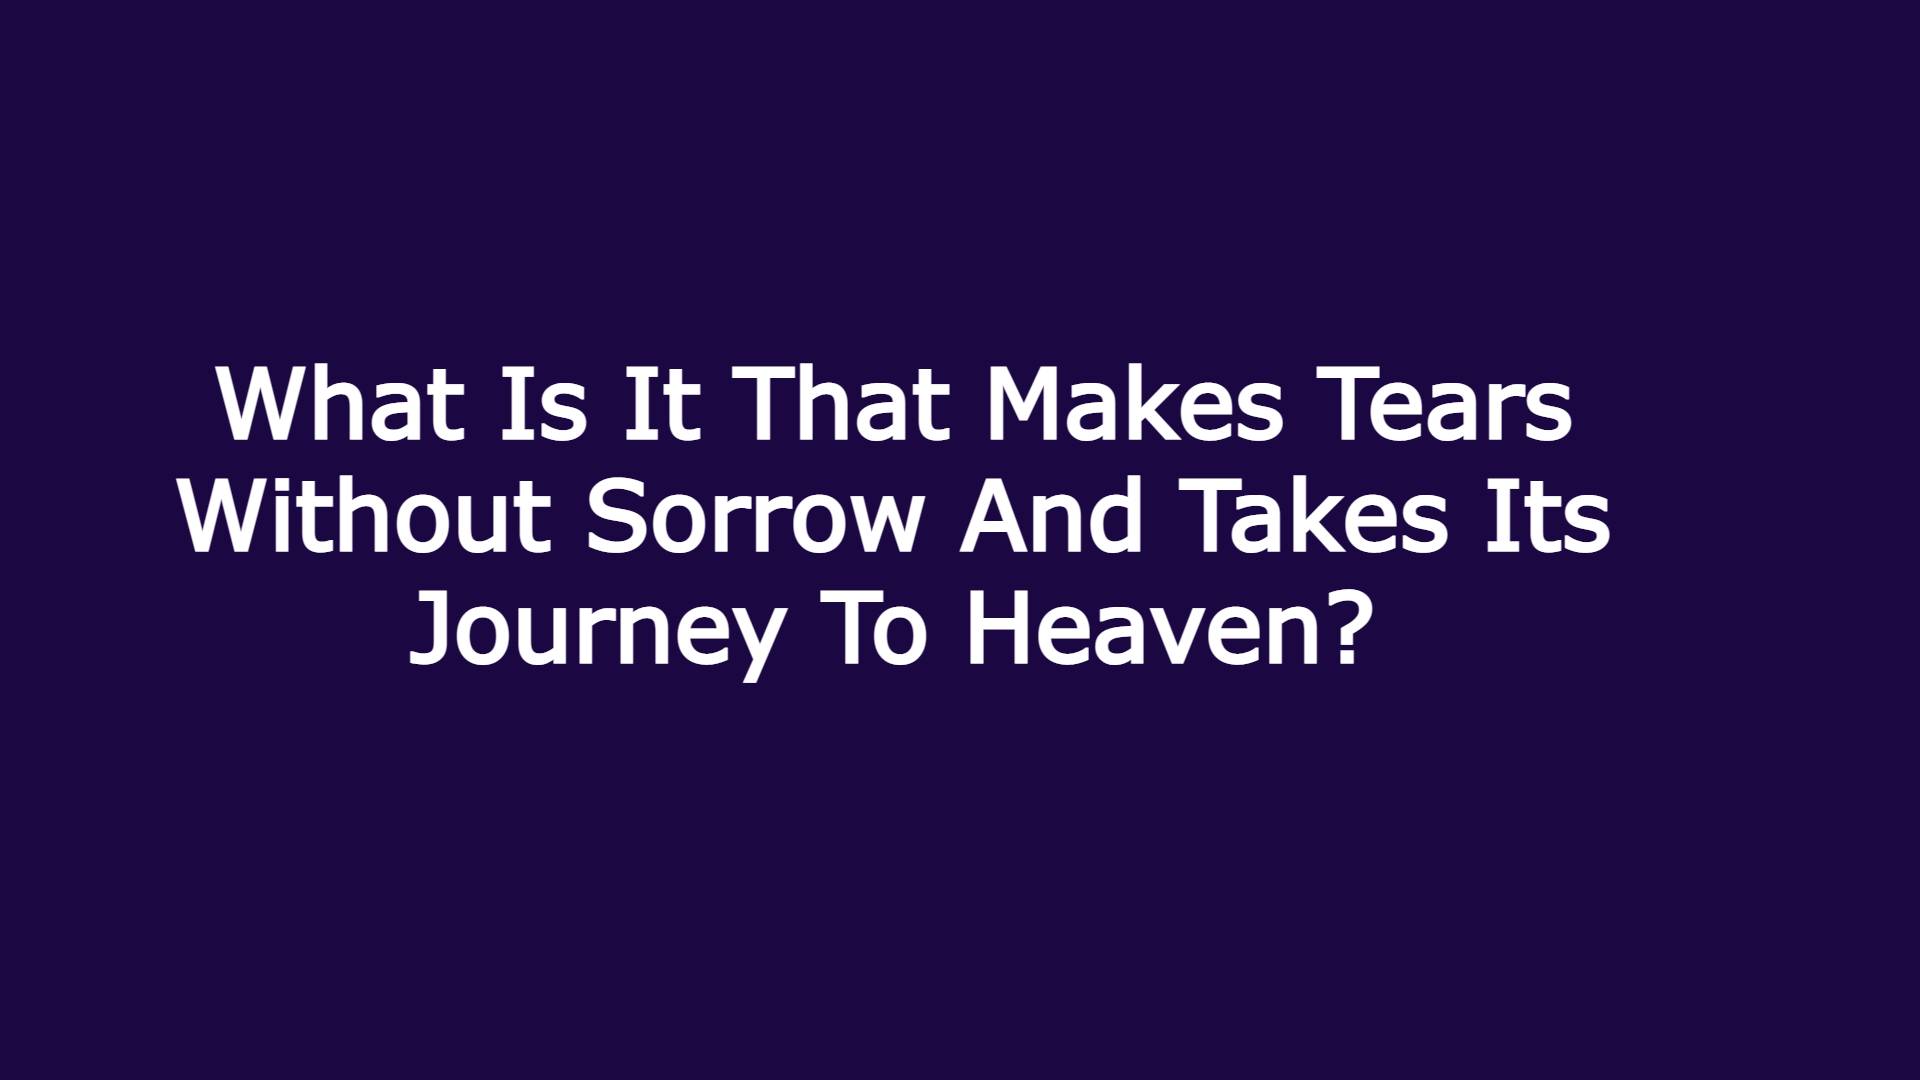 What Is It That Makes Tears Without Sorrow And Takes Its Journey To Heaven?